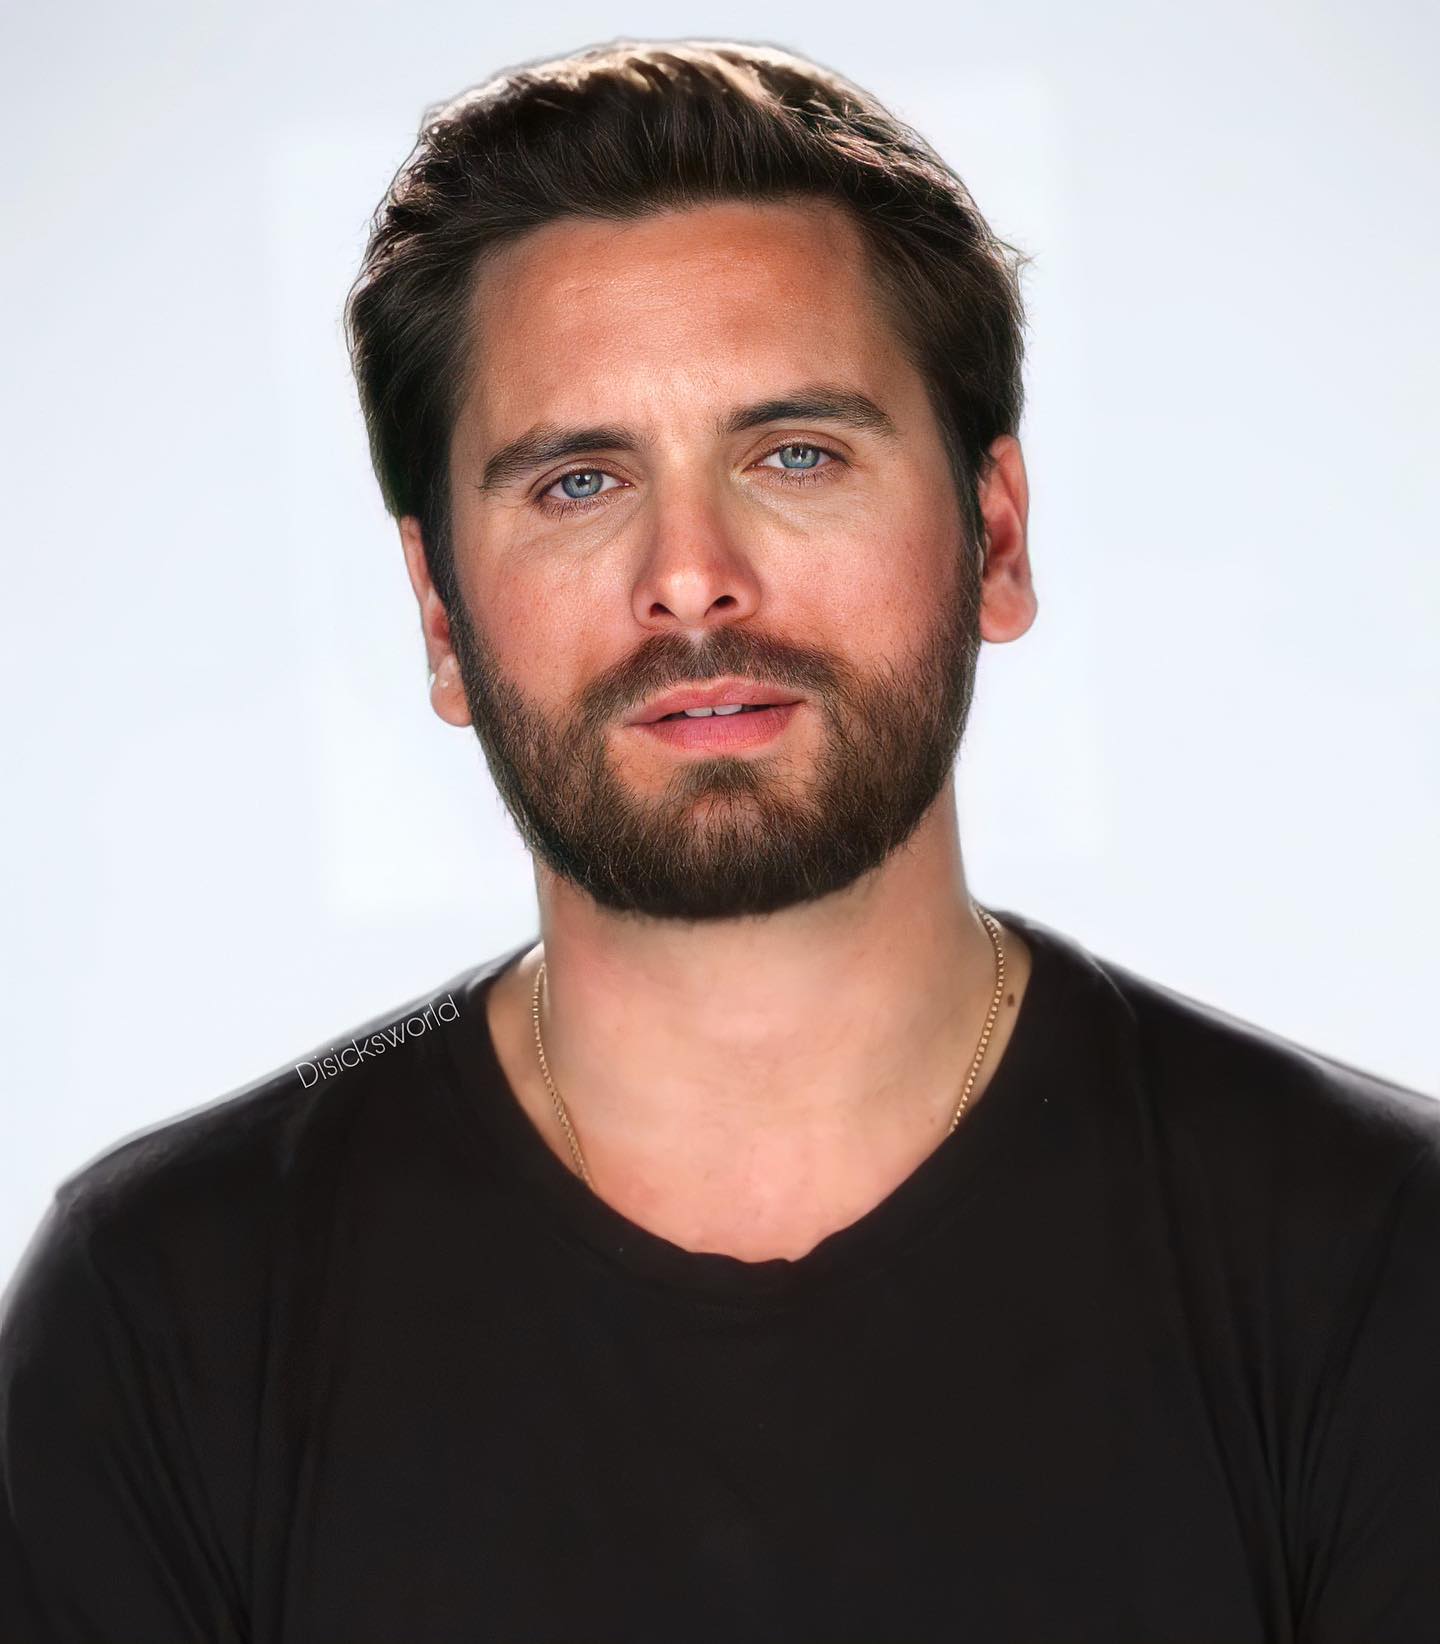 Scott Disick West Age, Height, Wife, Family – Biographyprofiles